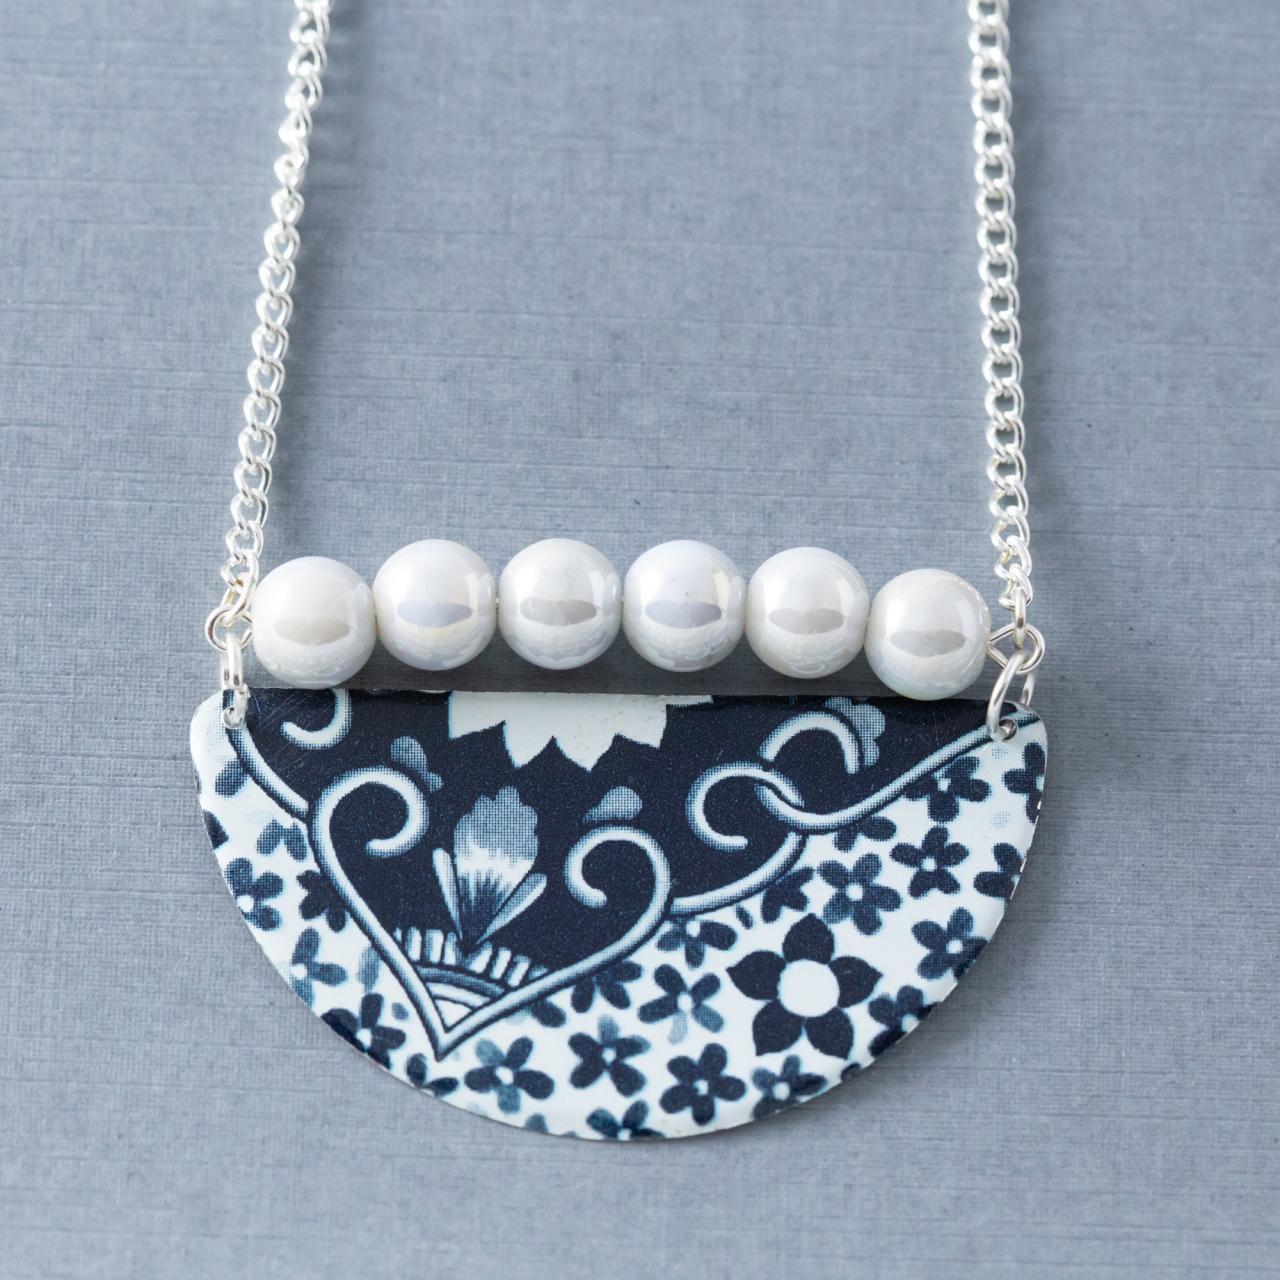 Dark Blue And White Flower Half Circle Tin Necklace With Light Grey Glass Beads And Silver Tone Chain, Tin Jewelry